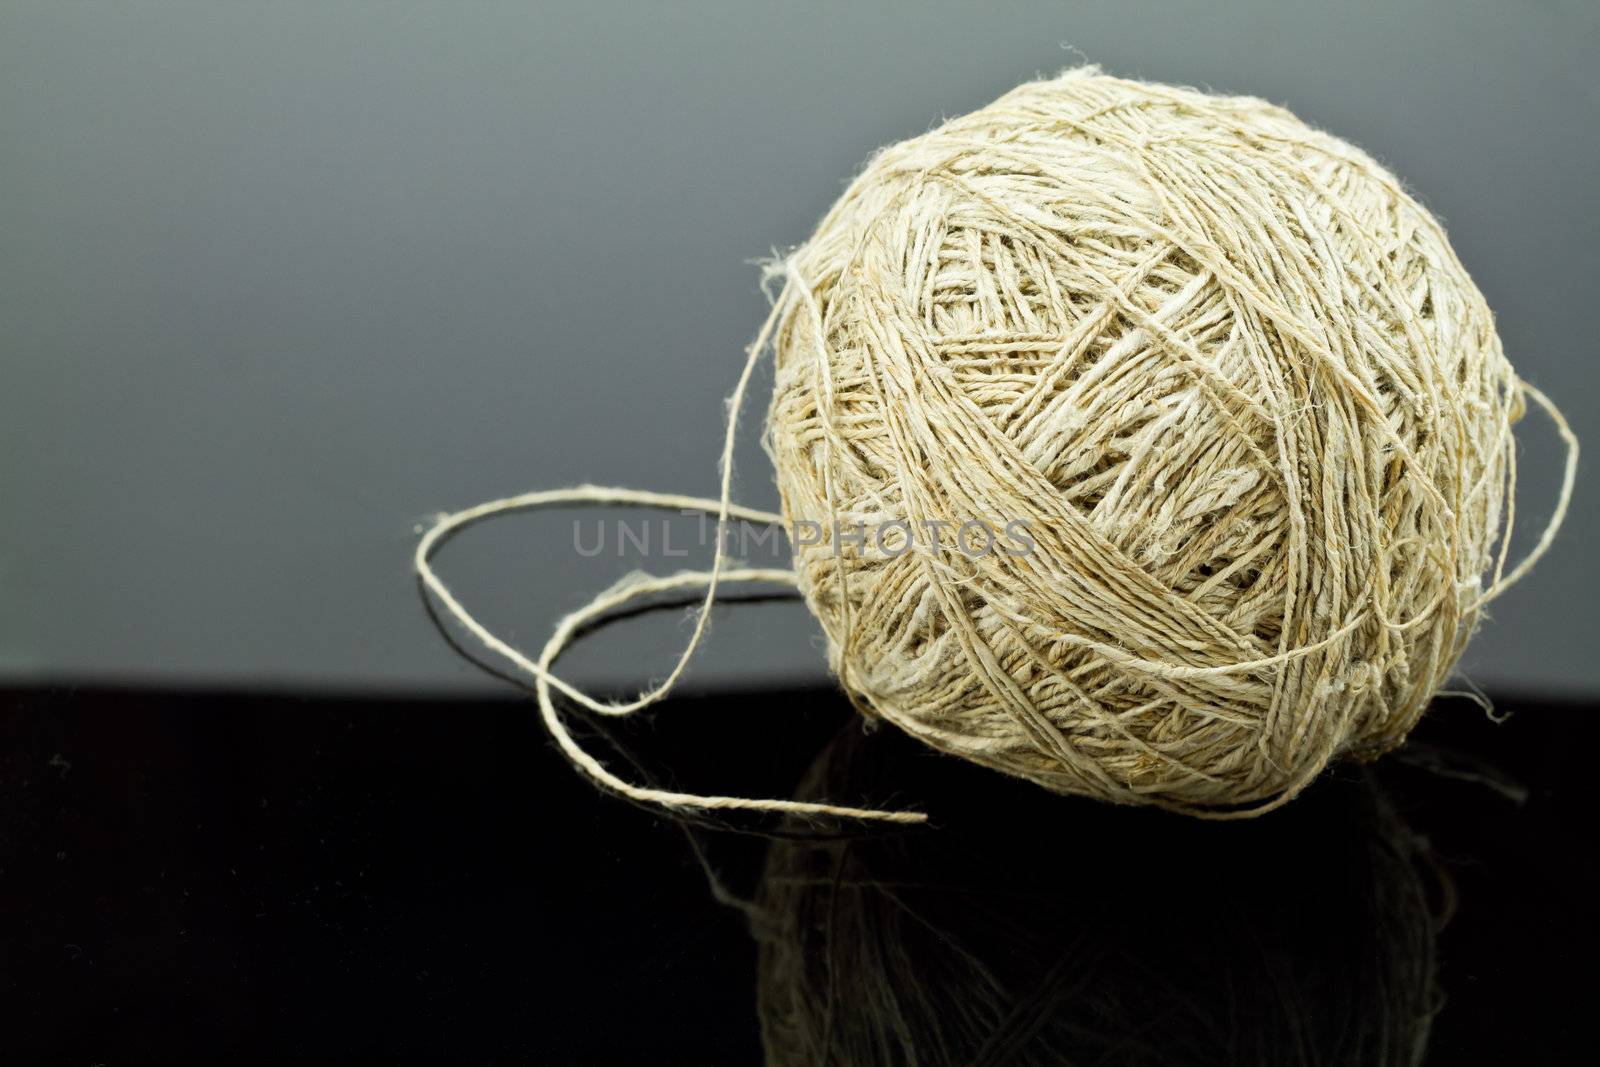 A ball of twine sits on a reflective black surface.